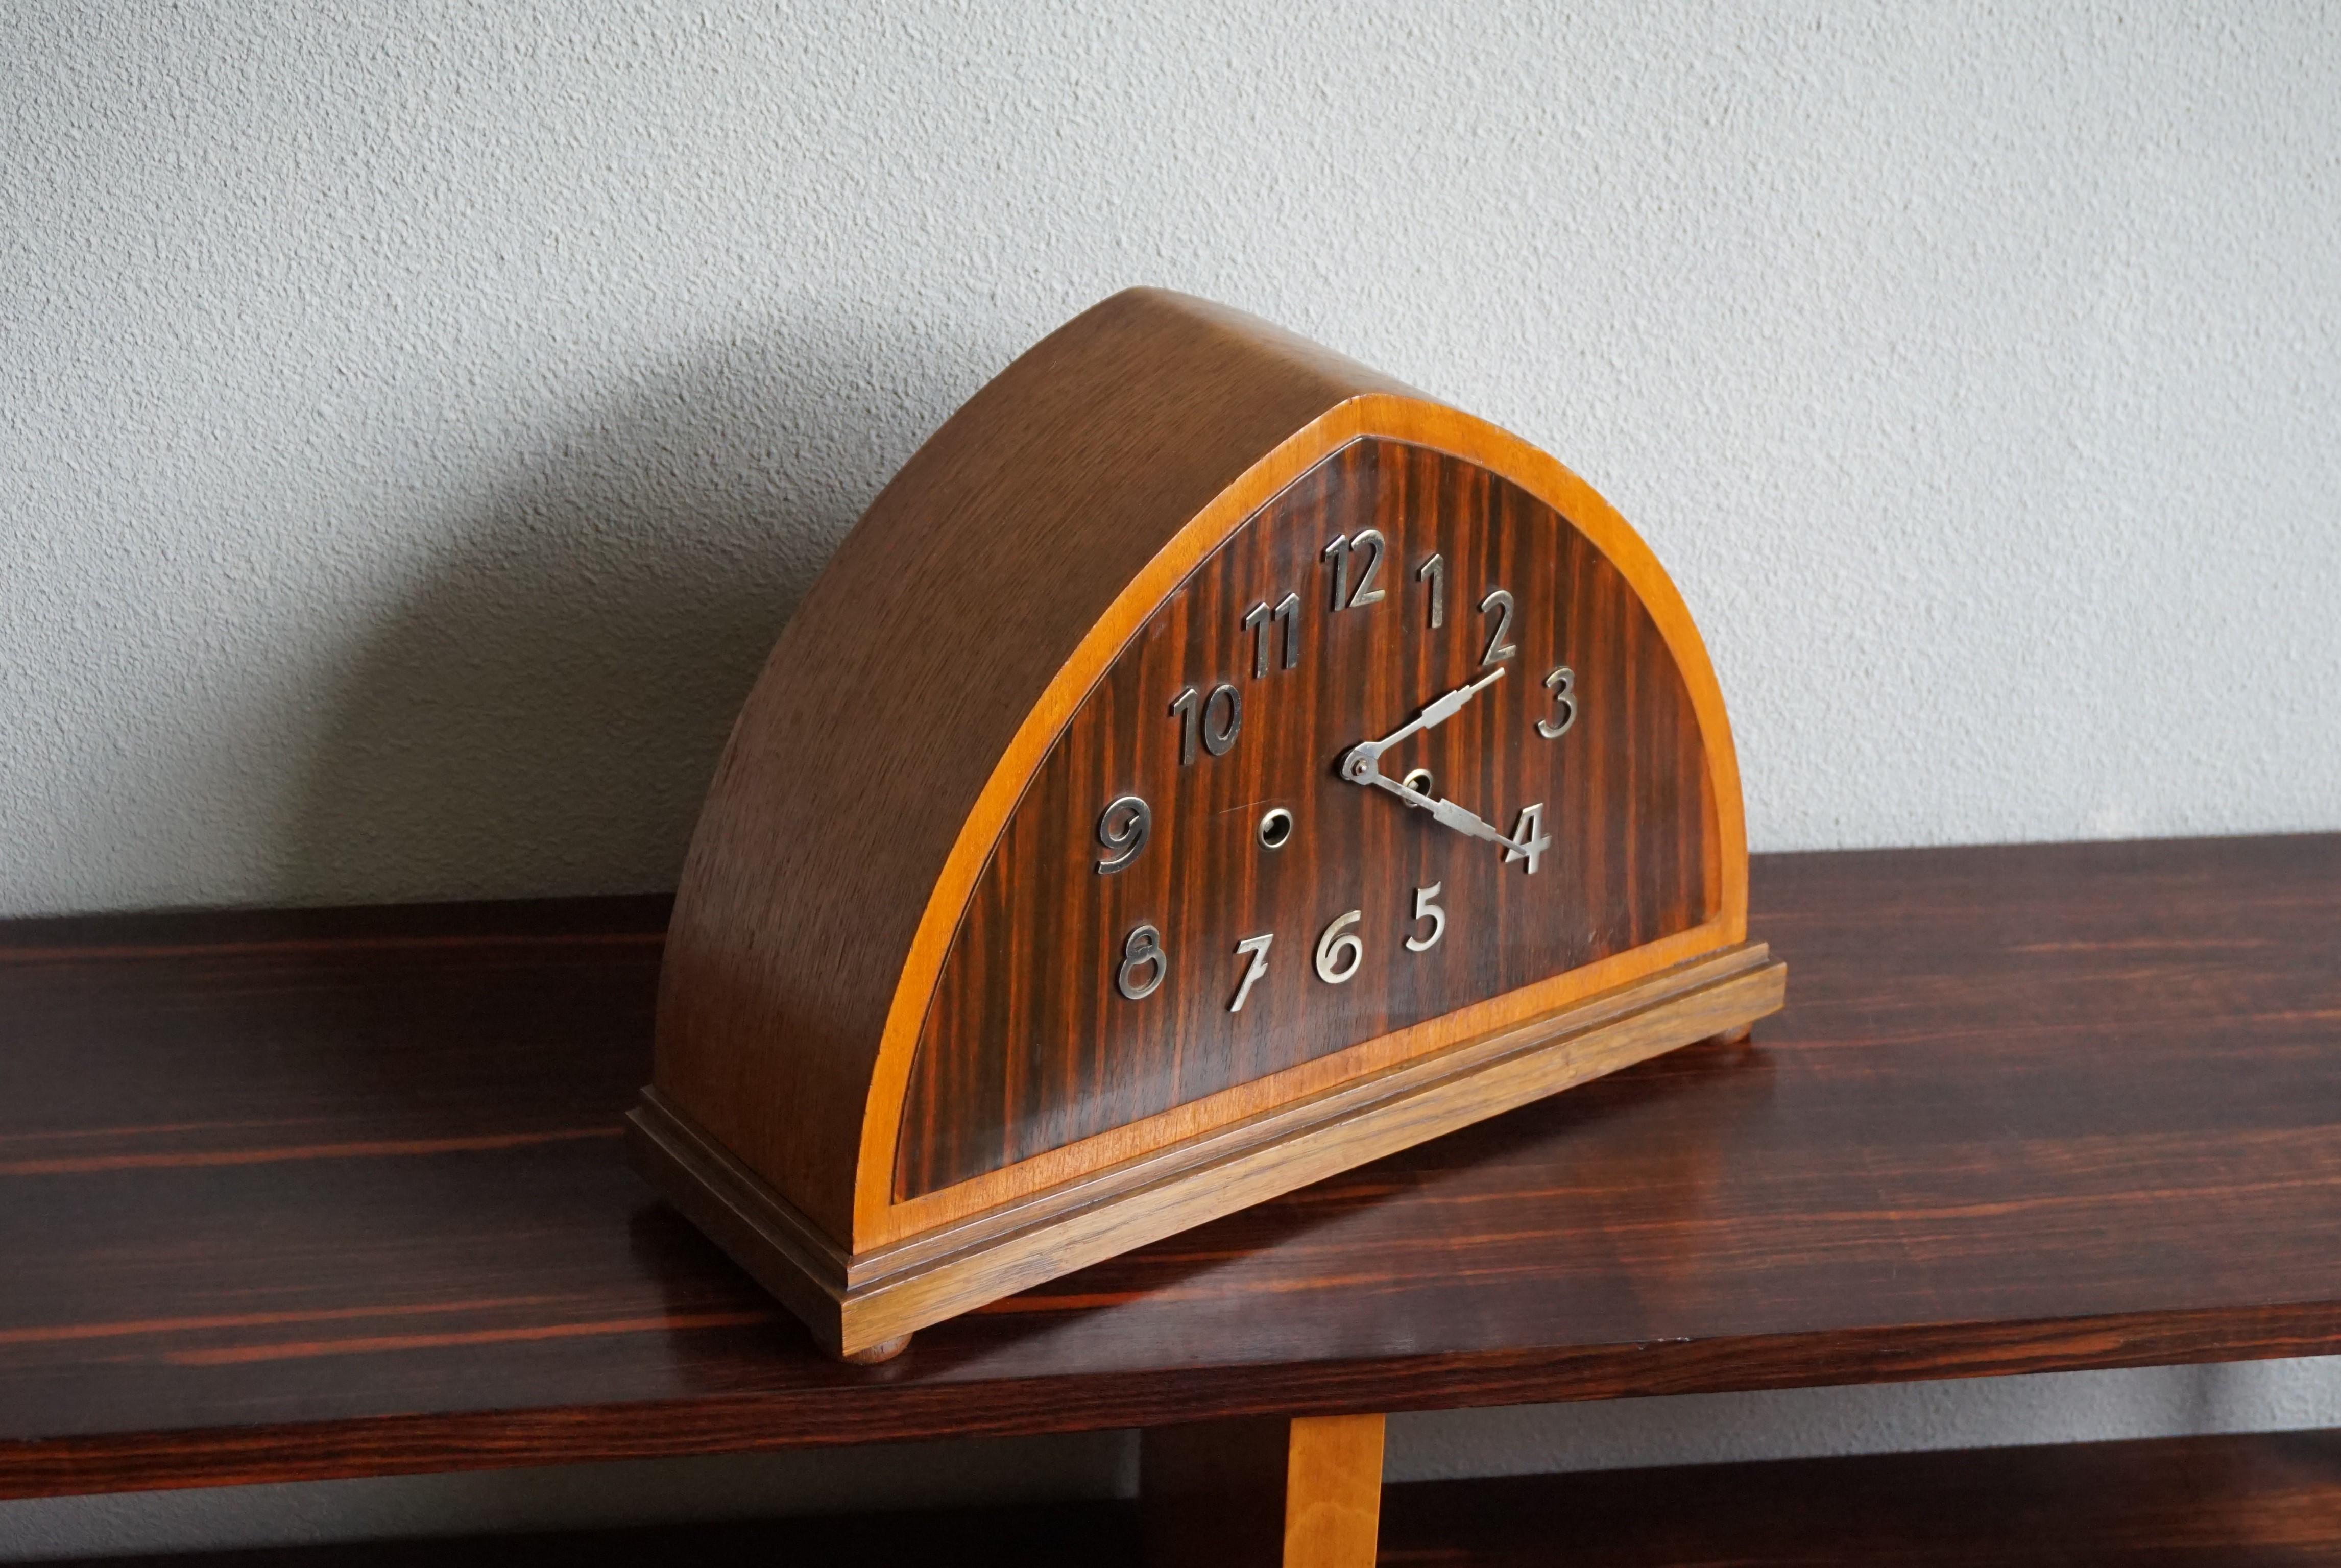 Beautiful design and perfectly working Art Deco clock with a chime.

If you are looking for a great shape and excellent condition clock then this original specimen from the 1920s could be perfect. The combination of the dark Cocobolo dial face